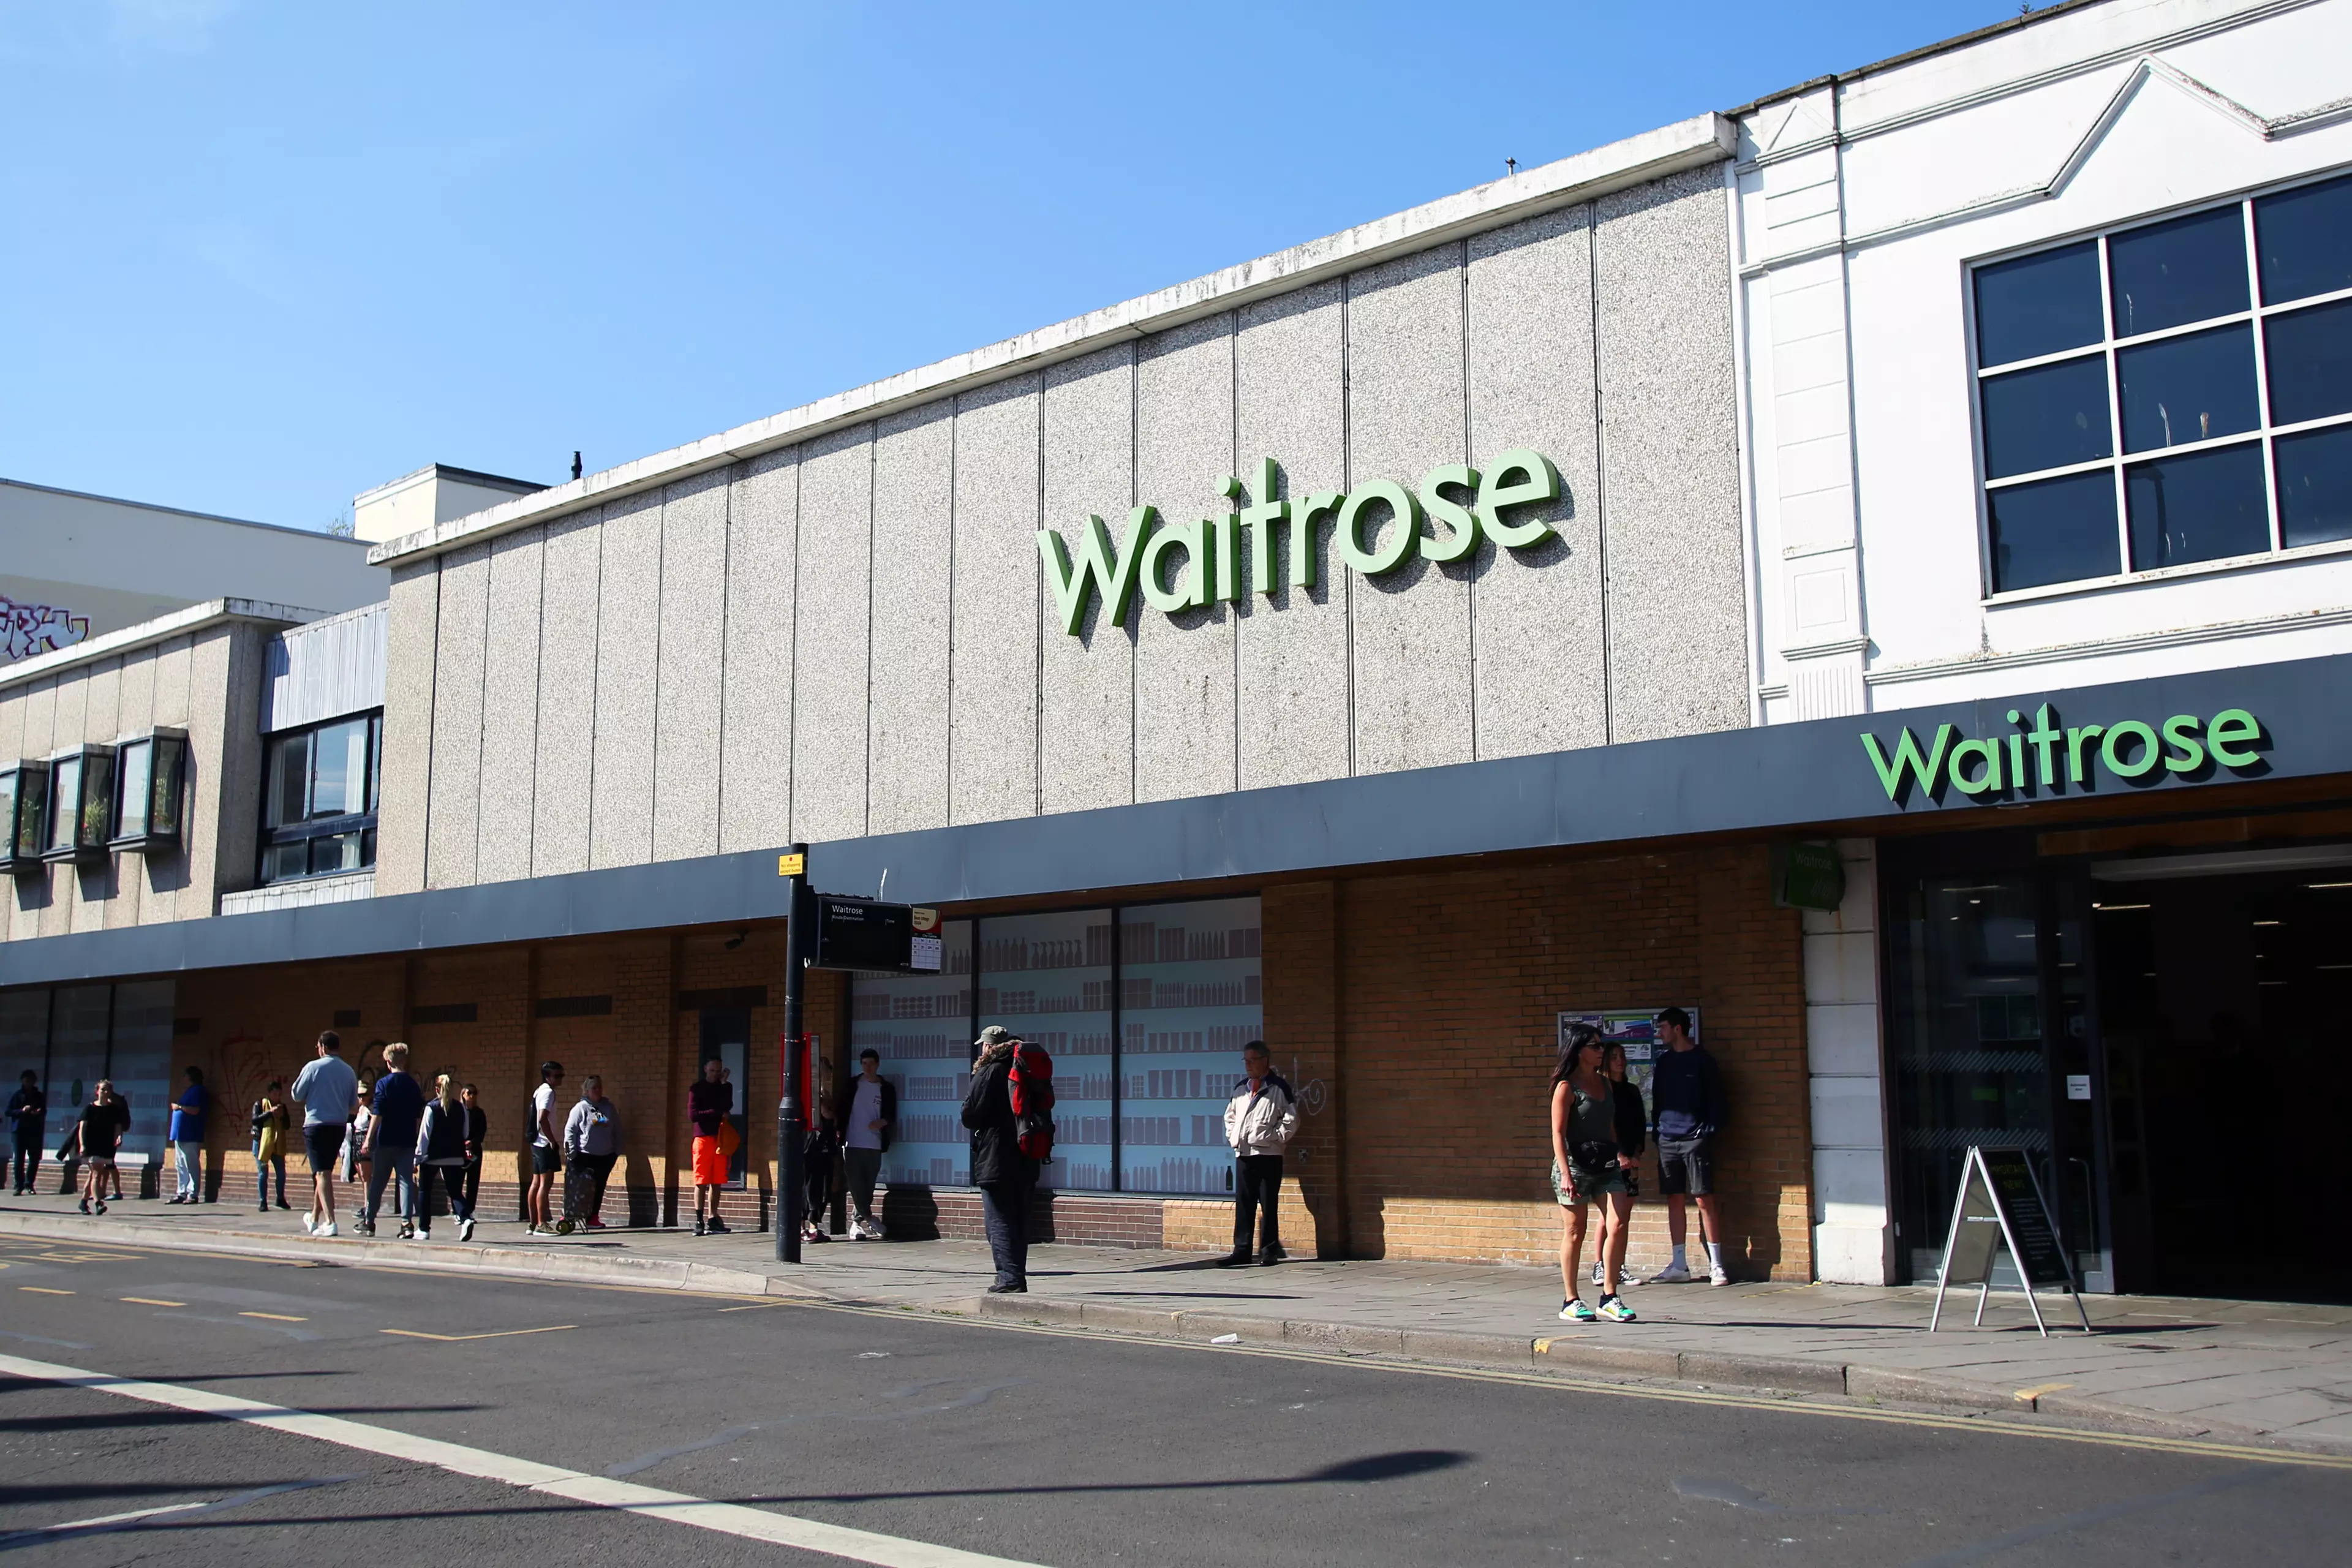 The 37-year-old also went to a Waitrose cafe.